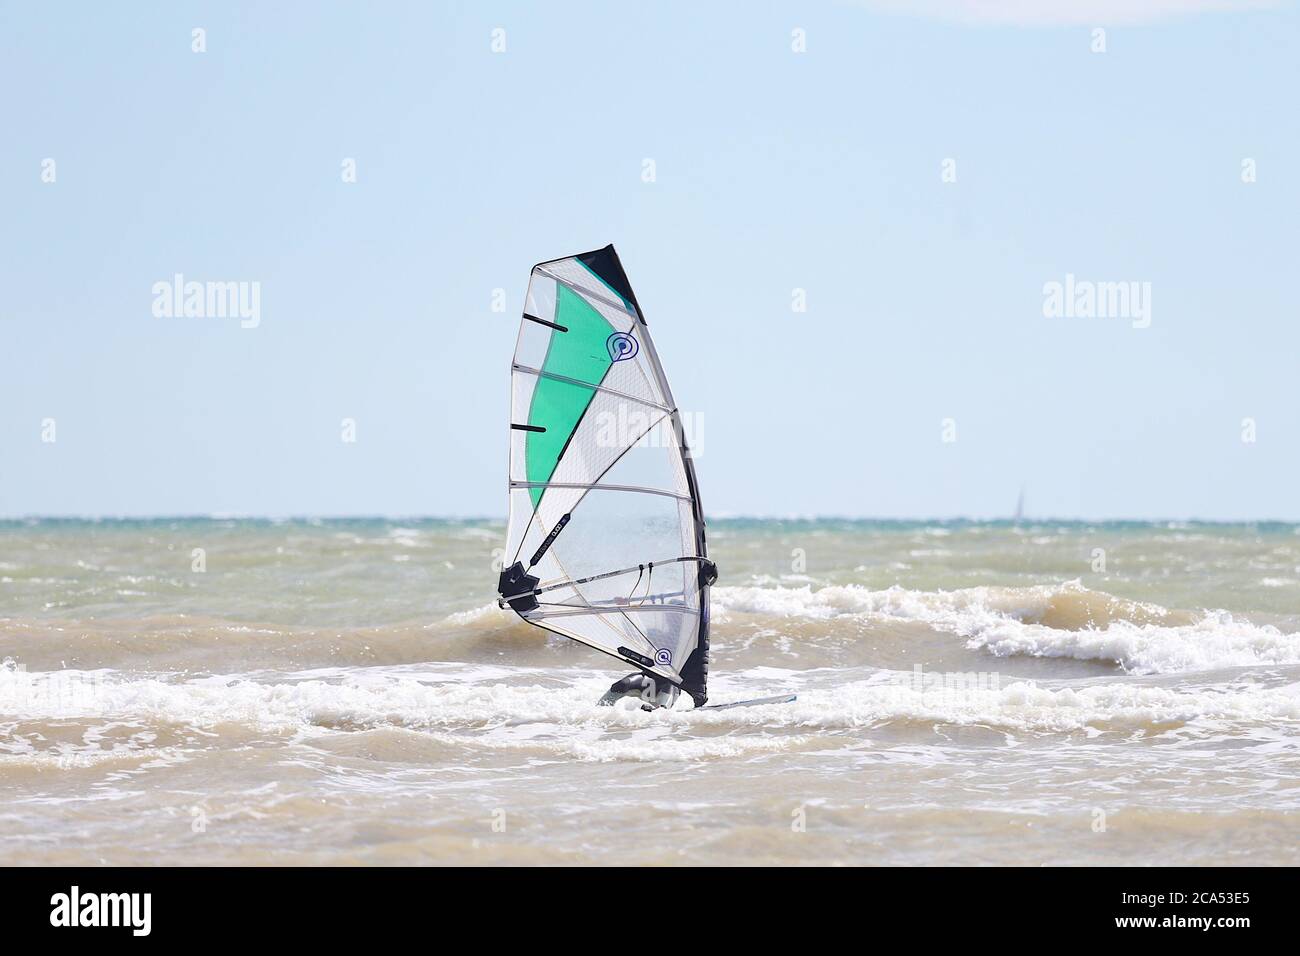 Camber, East Sussex, UK. 04 Aug, 2020. UK Weather: The wind has picked up which is Ideal for these kite surfers who take advantage of the blustery conditions before the predicted heatwave in the coming days. Photo Credit: Paul Lawrenson-PAL Media/Alamy Live News Stock Photo